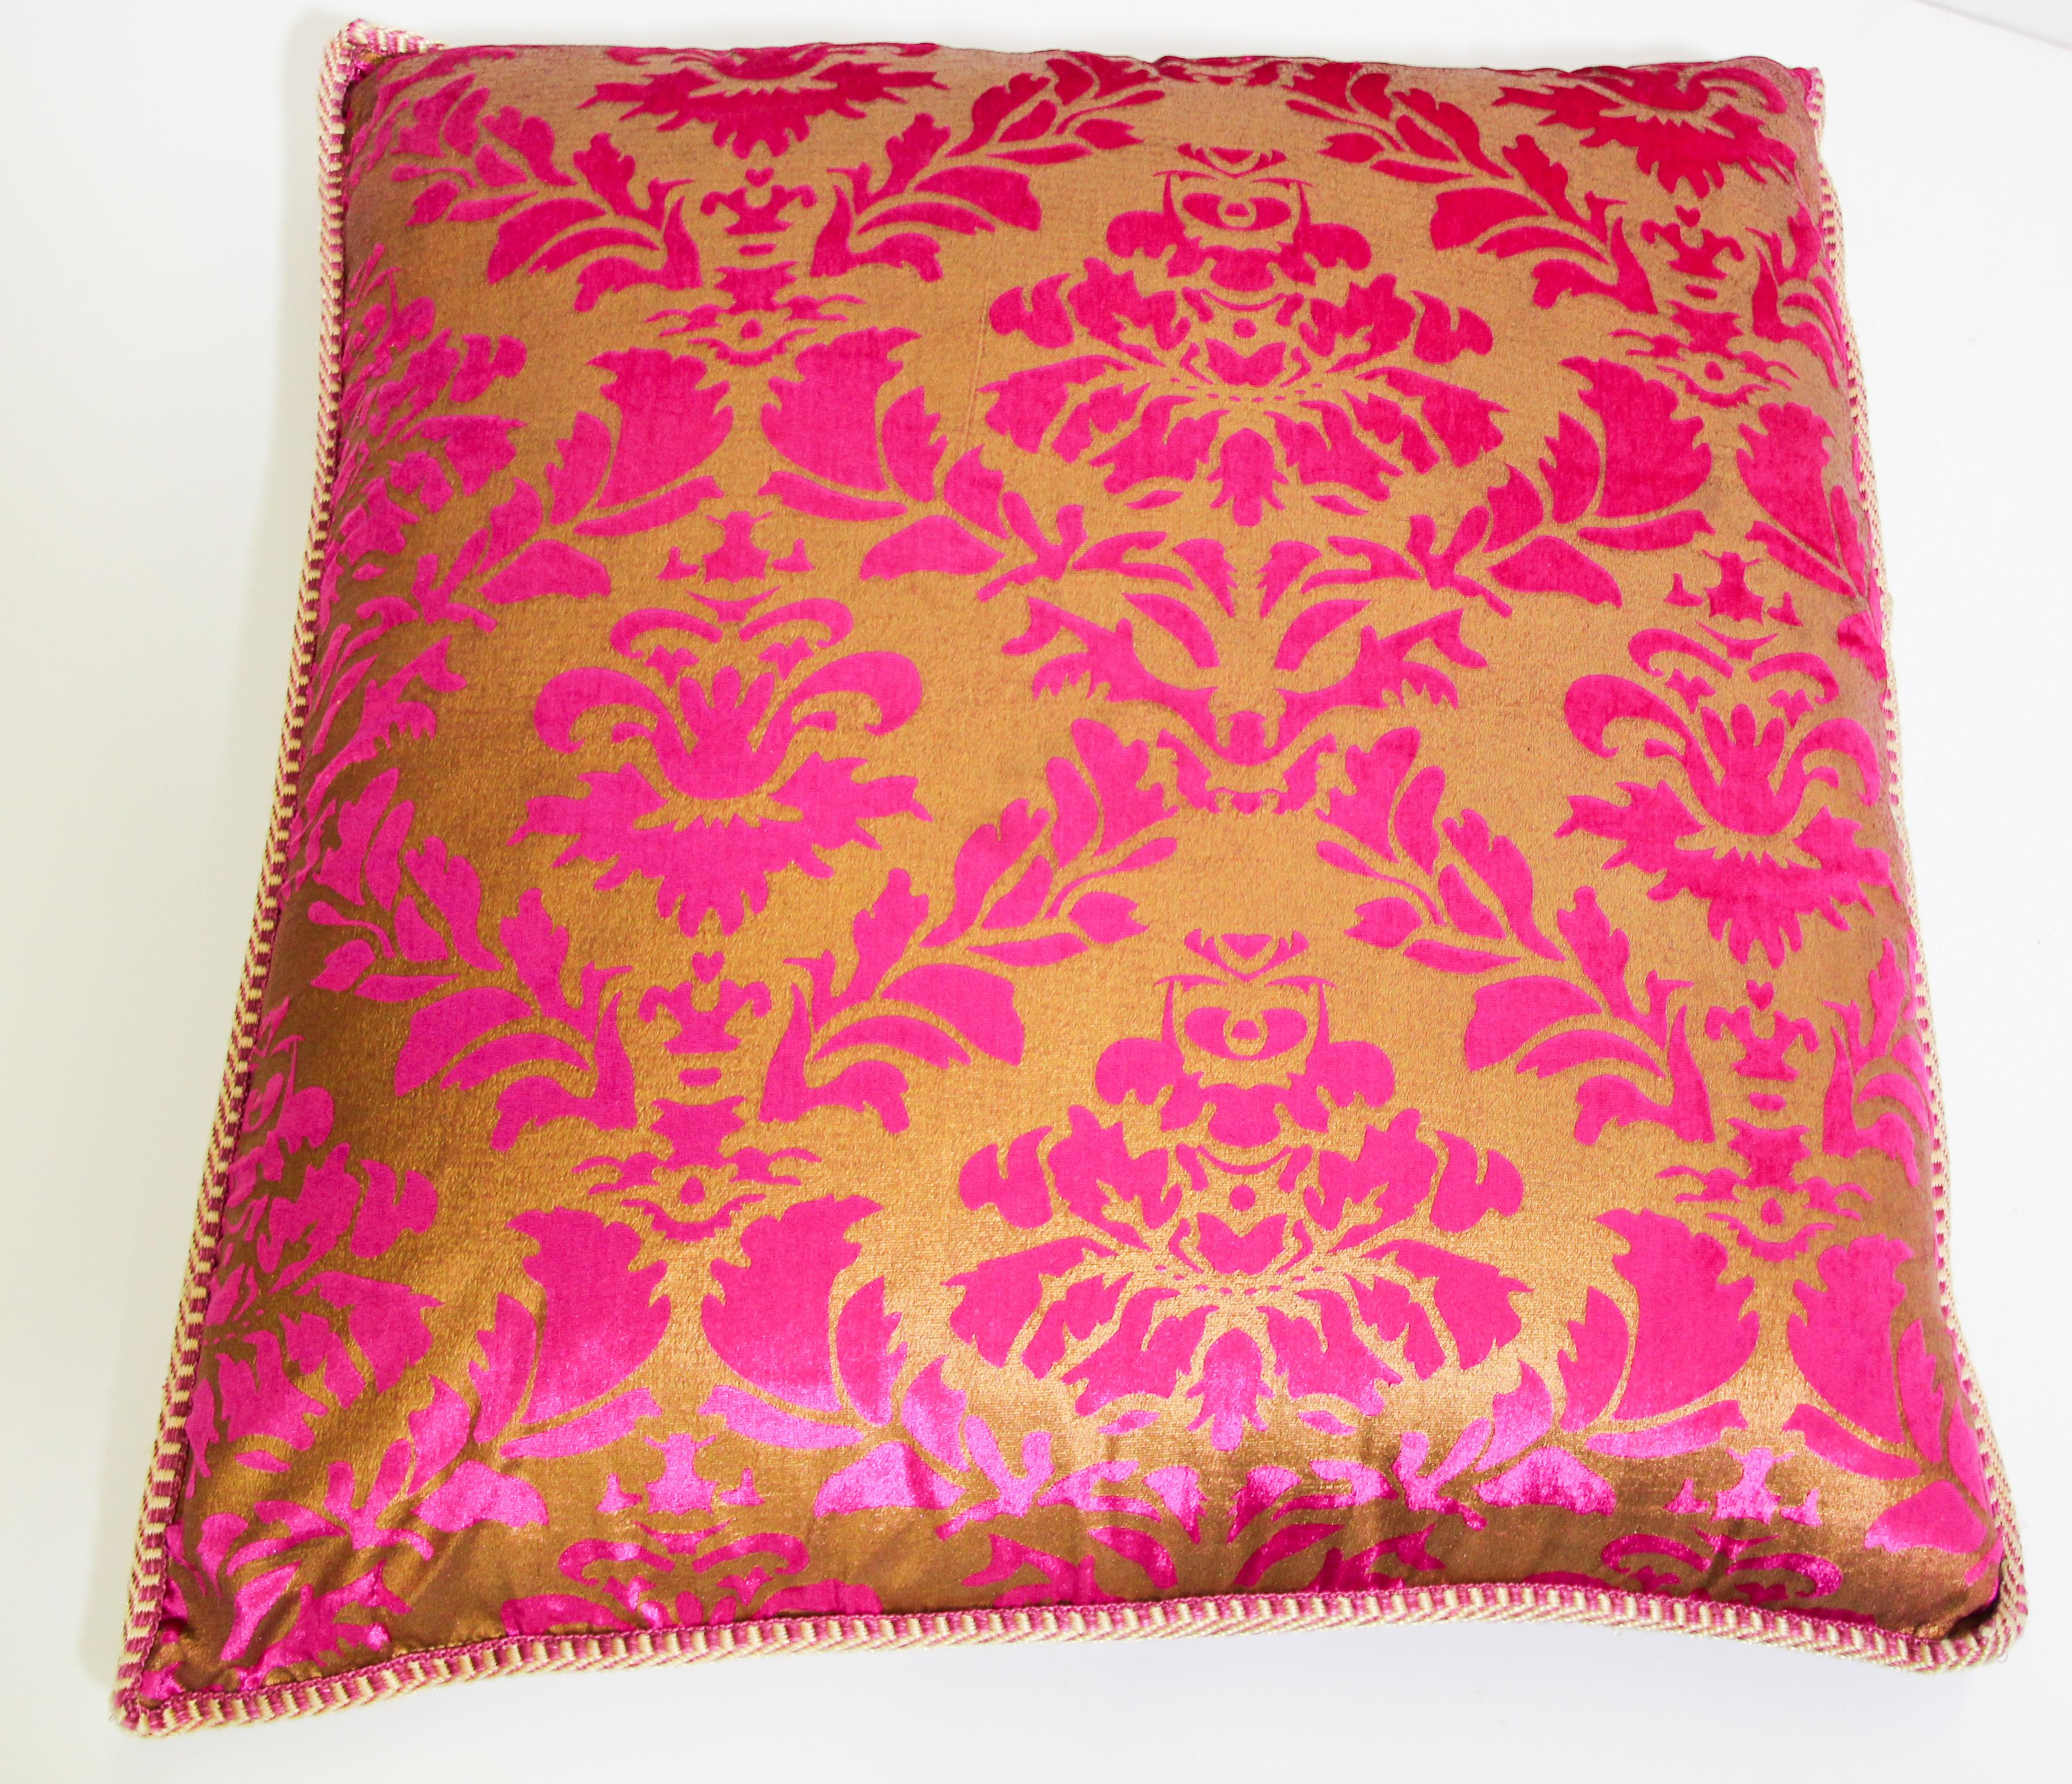 Oversized silk square pink and gold floor seat pillow.
Handcrafted from silk velvet cut fabric, these Moorish style floor seat cushions are great to use in kids room or around your yoga Bohemian or Moroccan room or for your pet.
Large oversized: 24